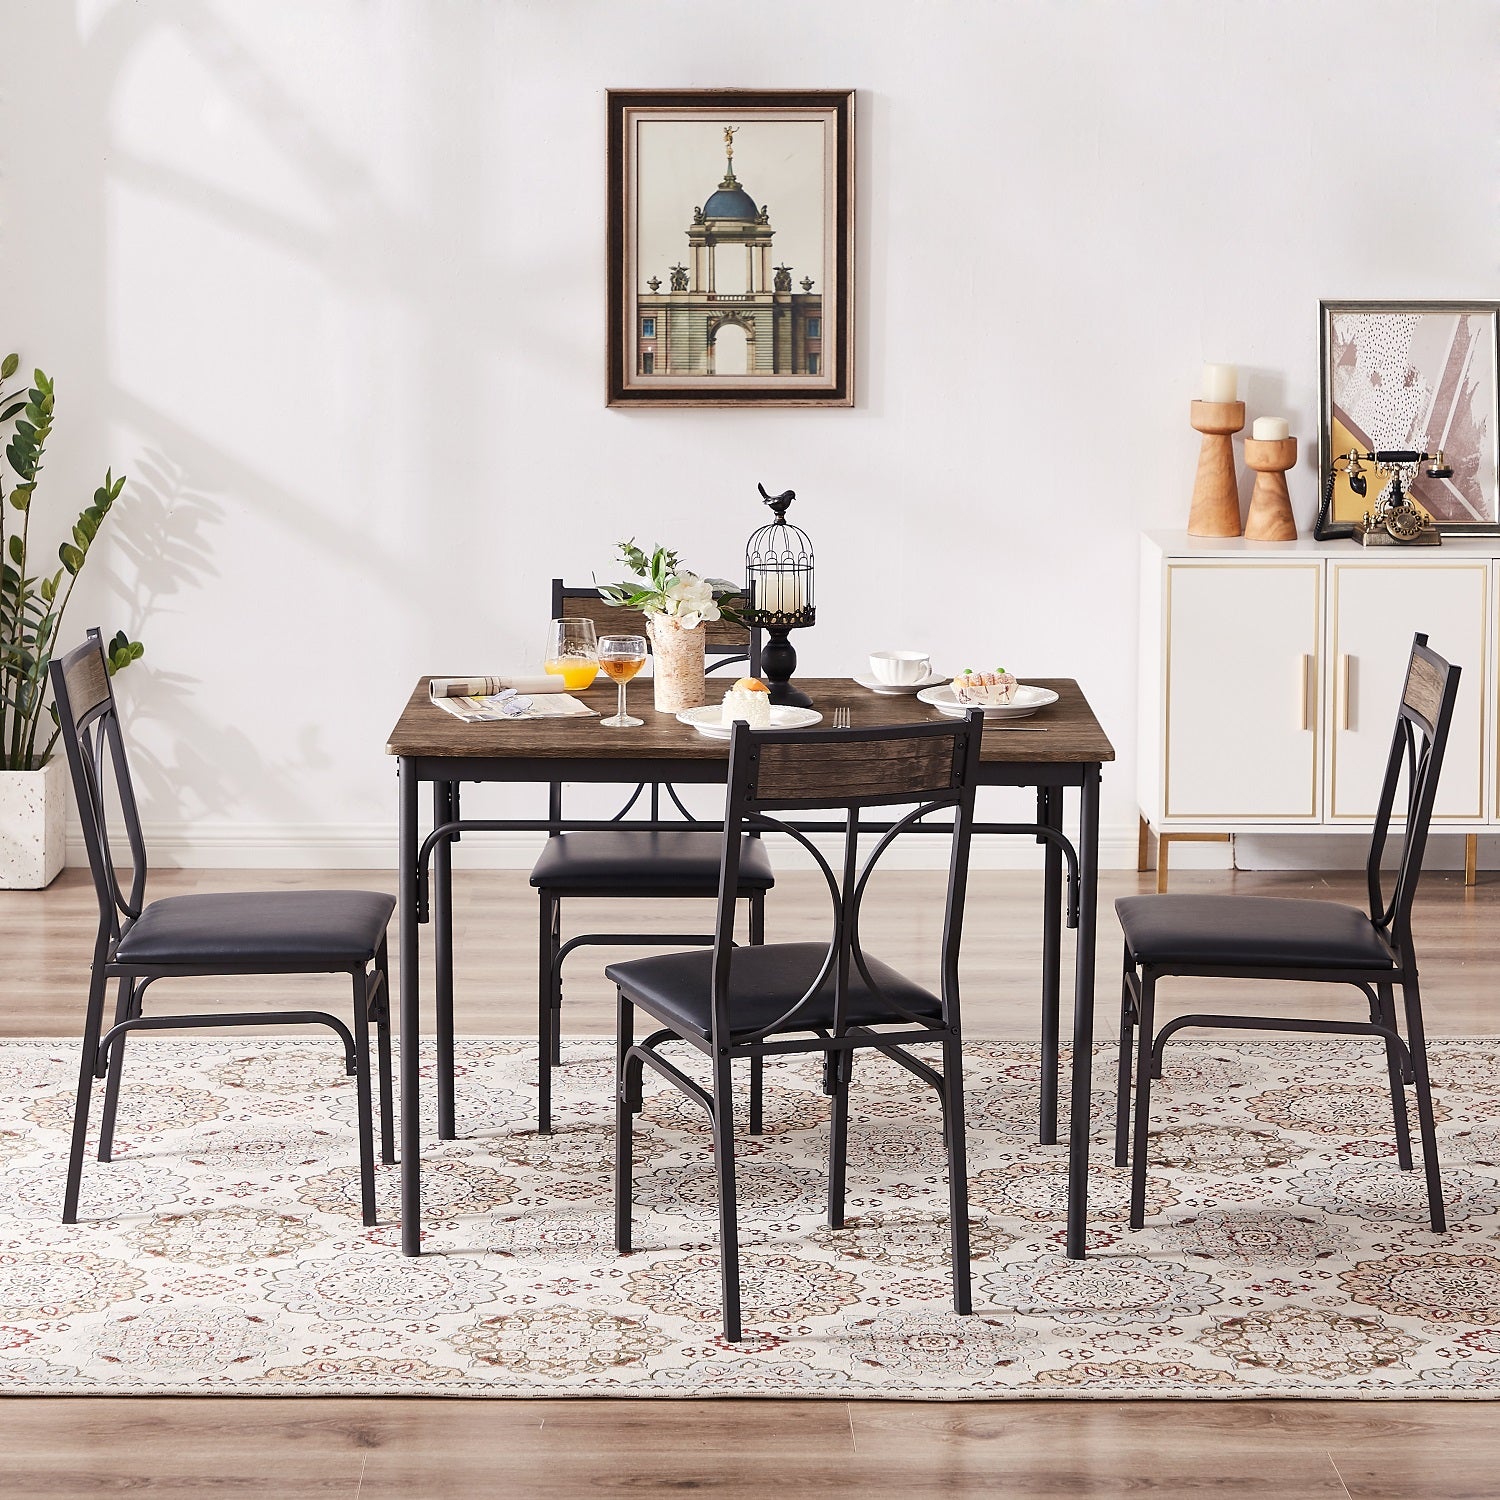 VECELO Industrial 5-Piece Modern Rectangular Dining Table Set with 4 Chairs